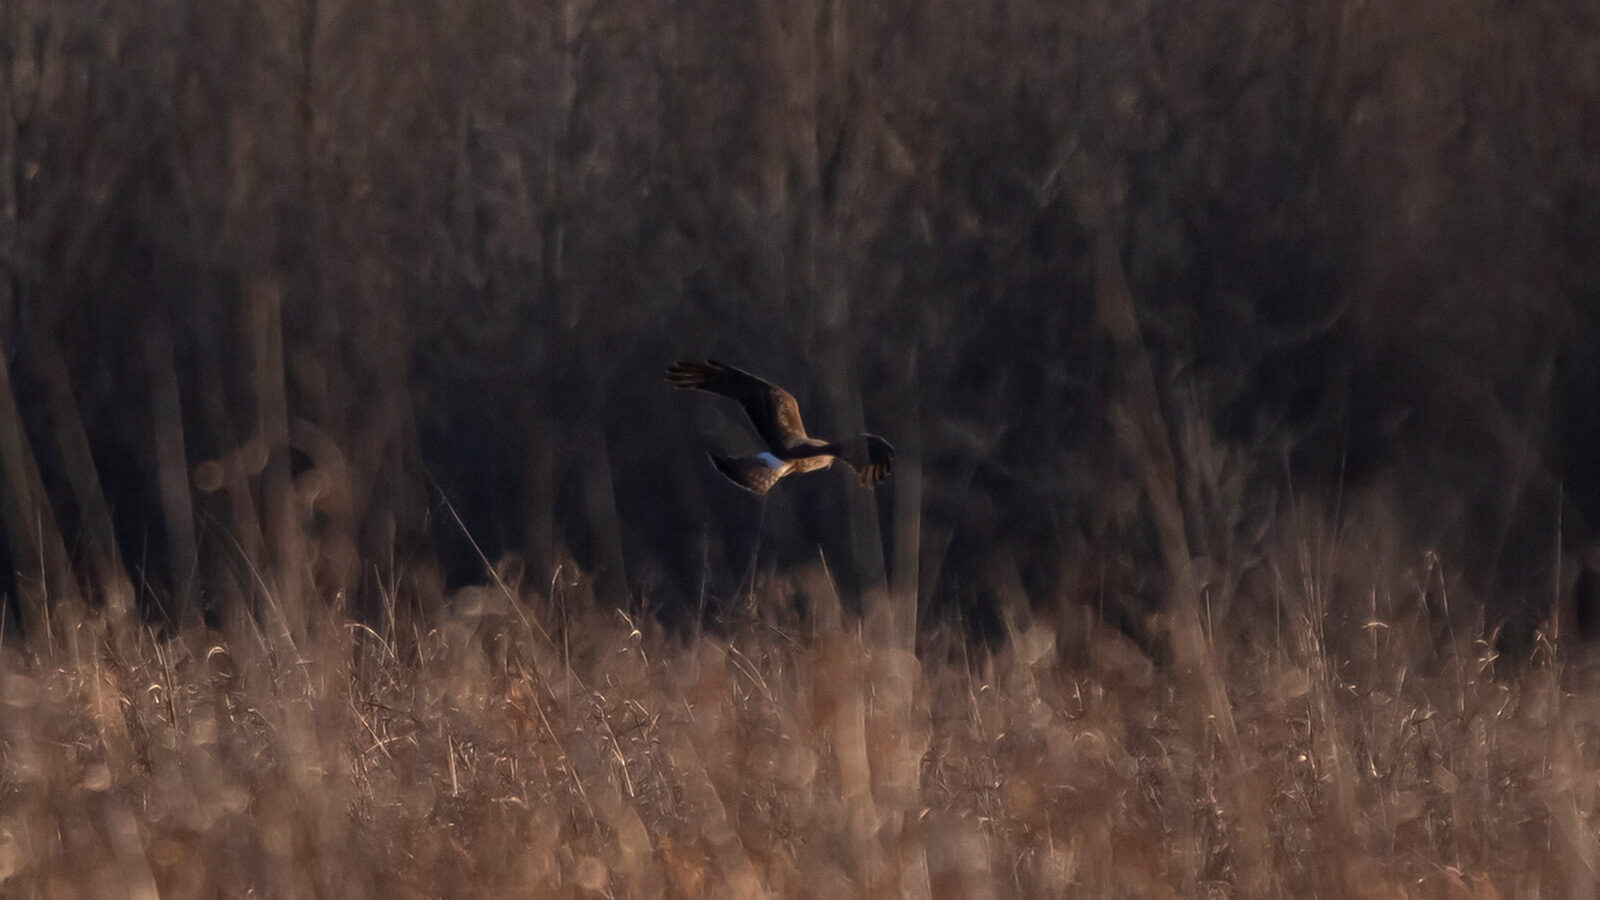 Northern harrier swooping down